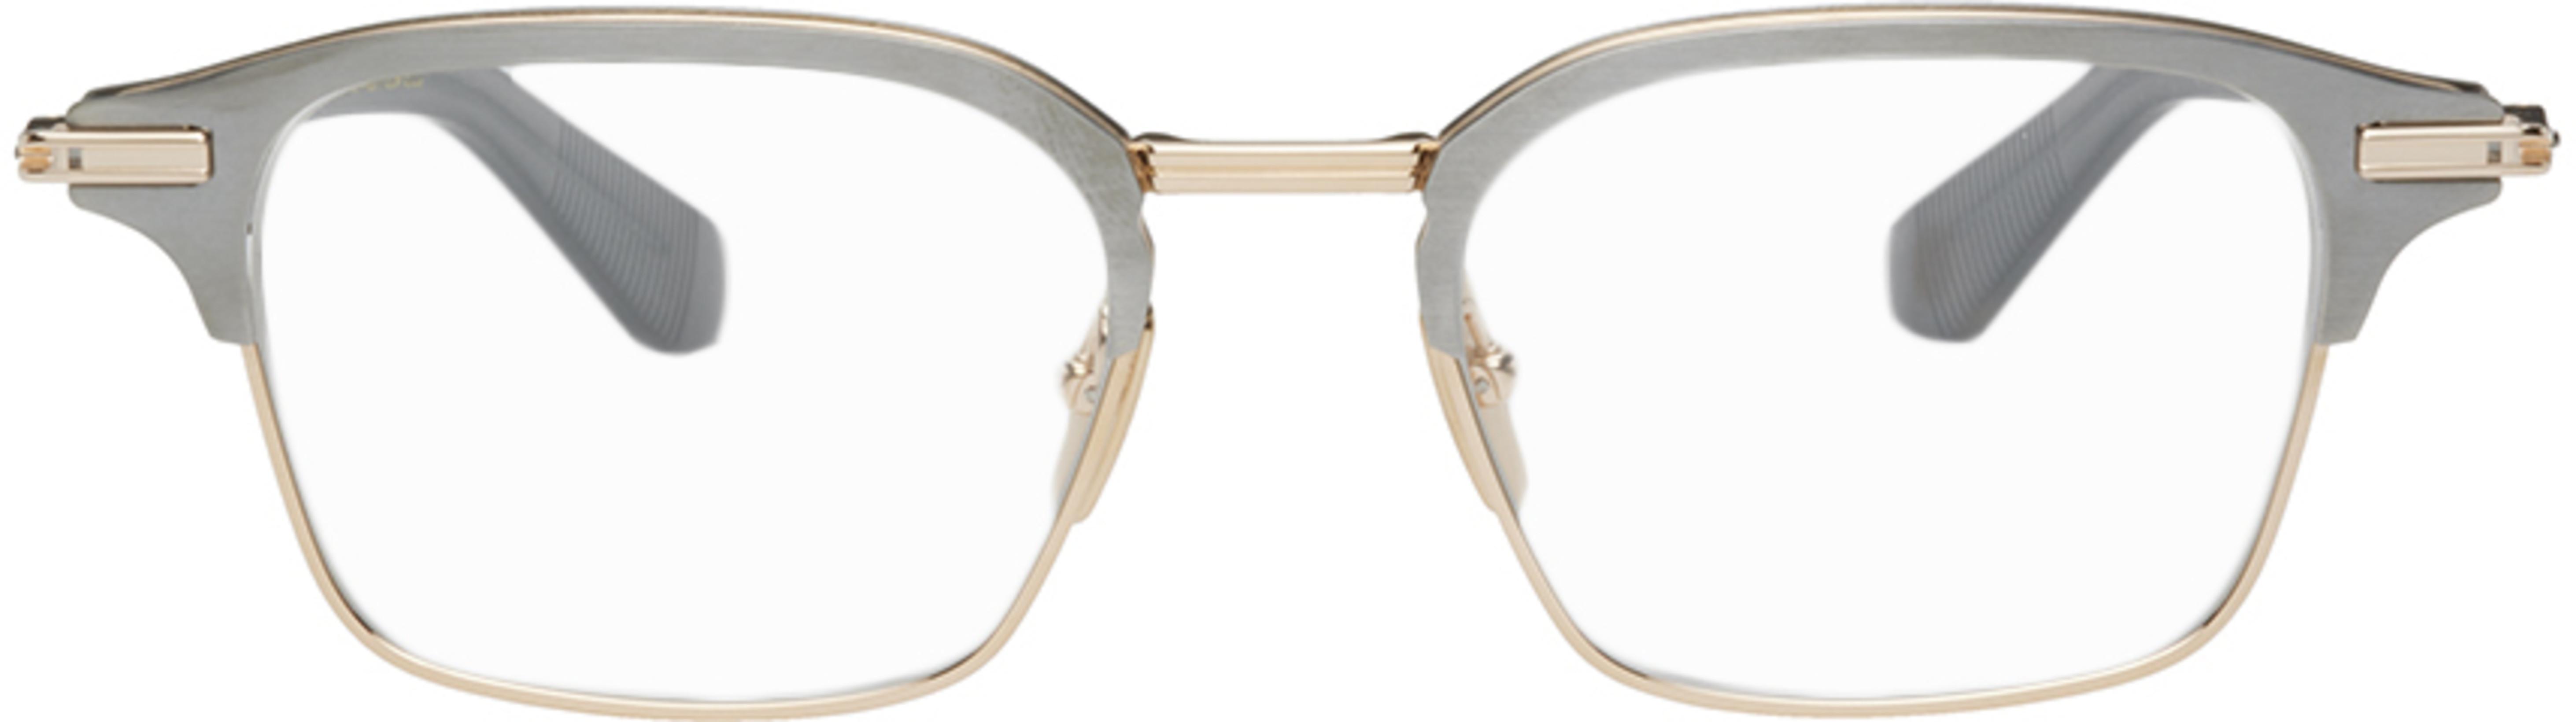 Silver & Gold Typographer Glasses by DITA